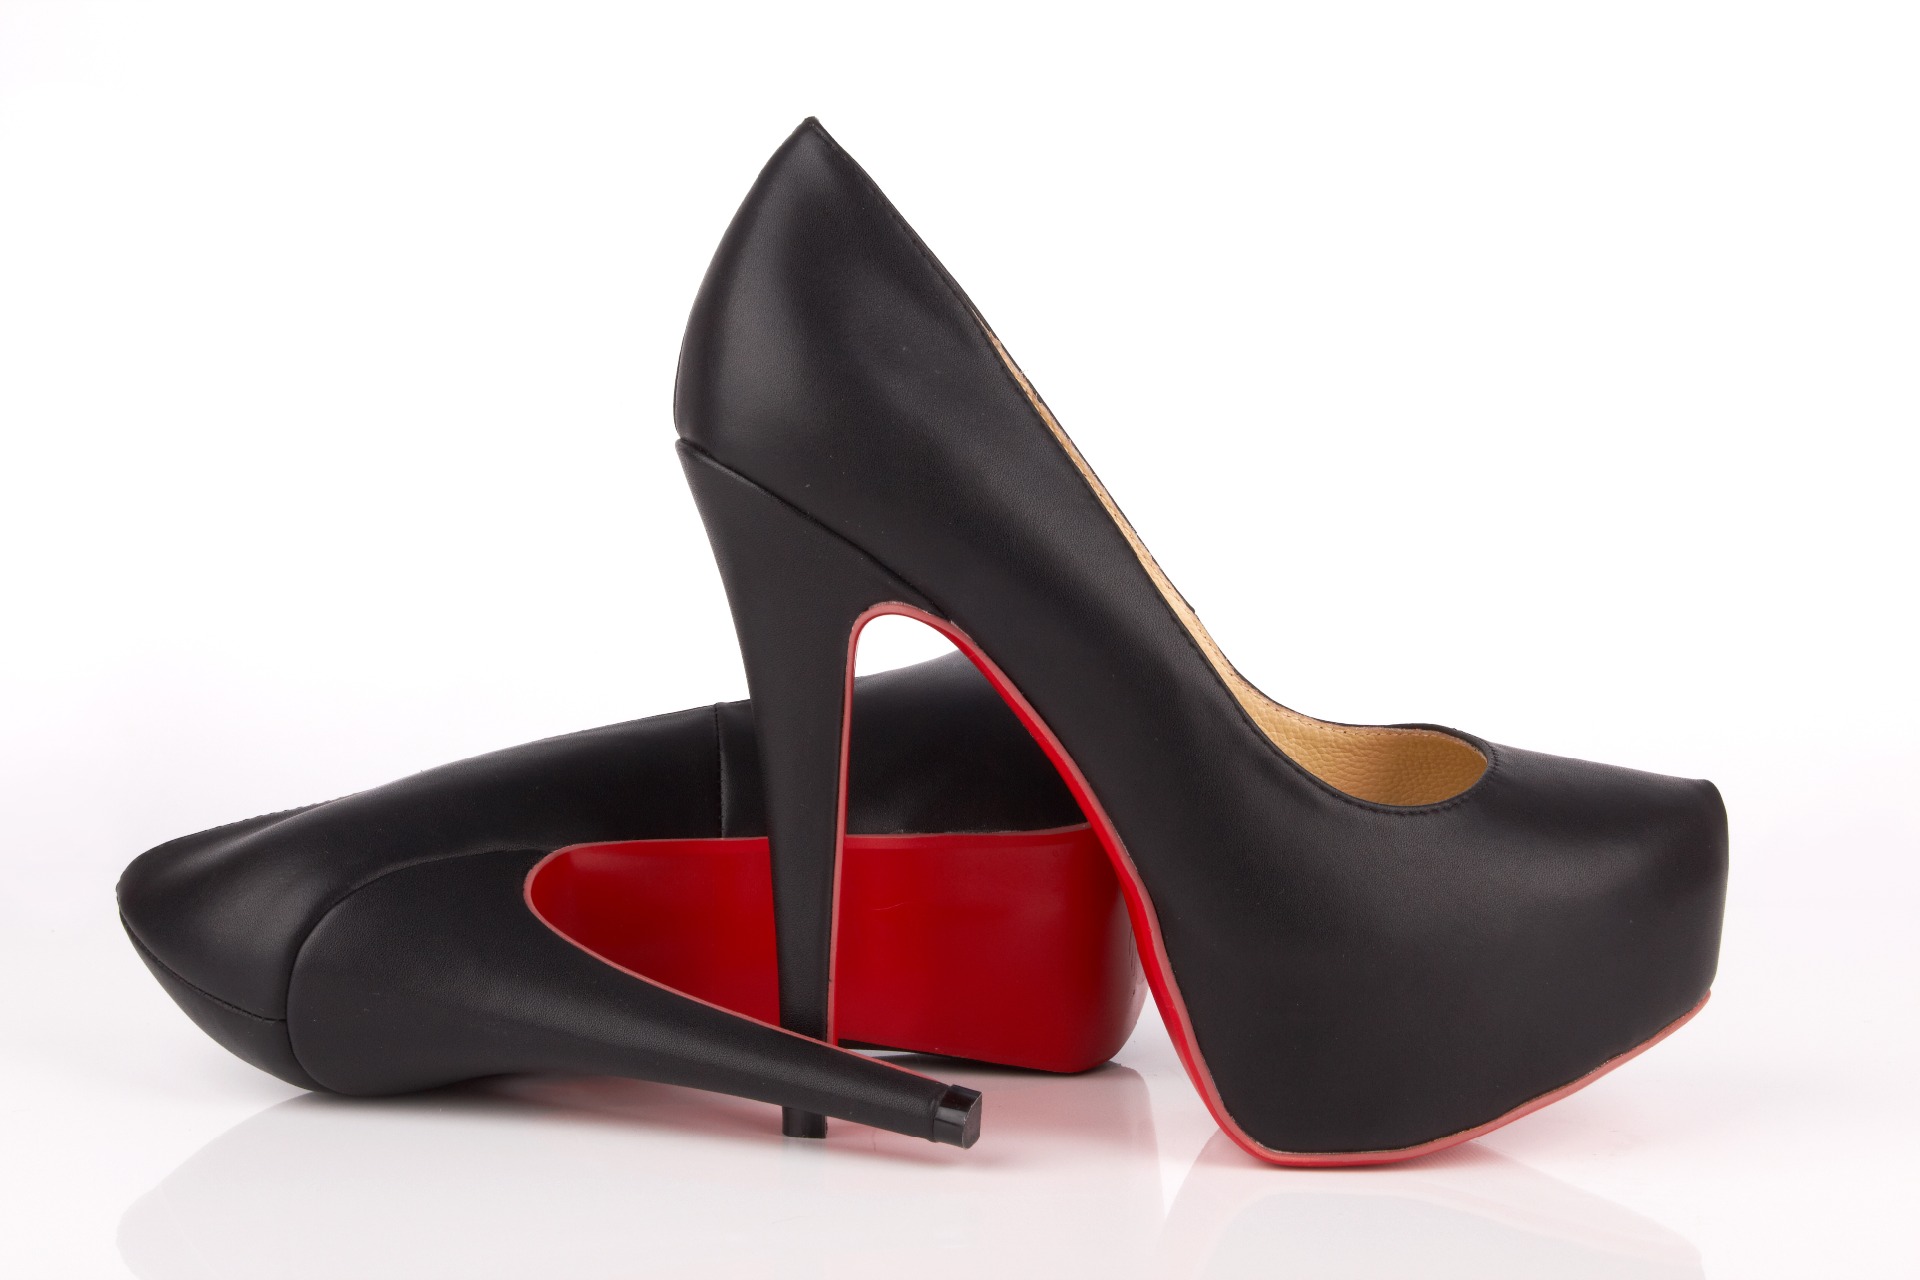 A pair of black heels with a red base